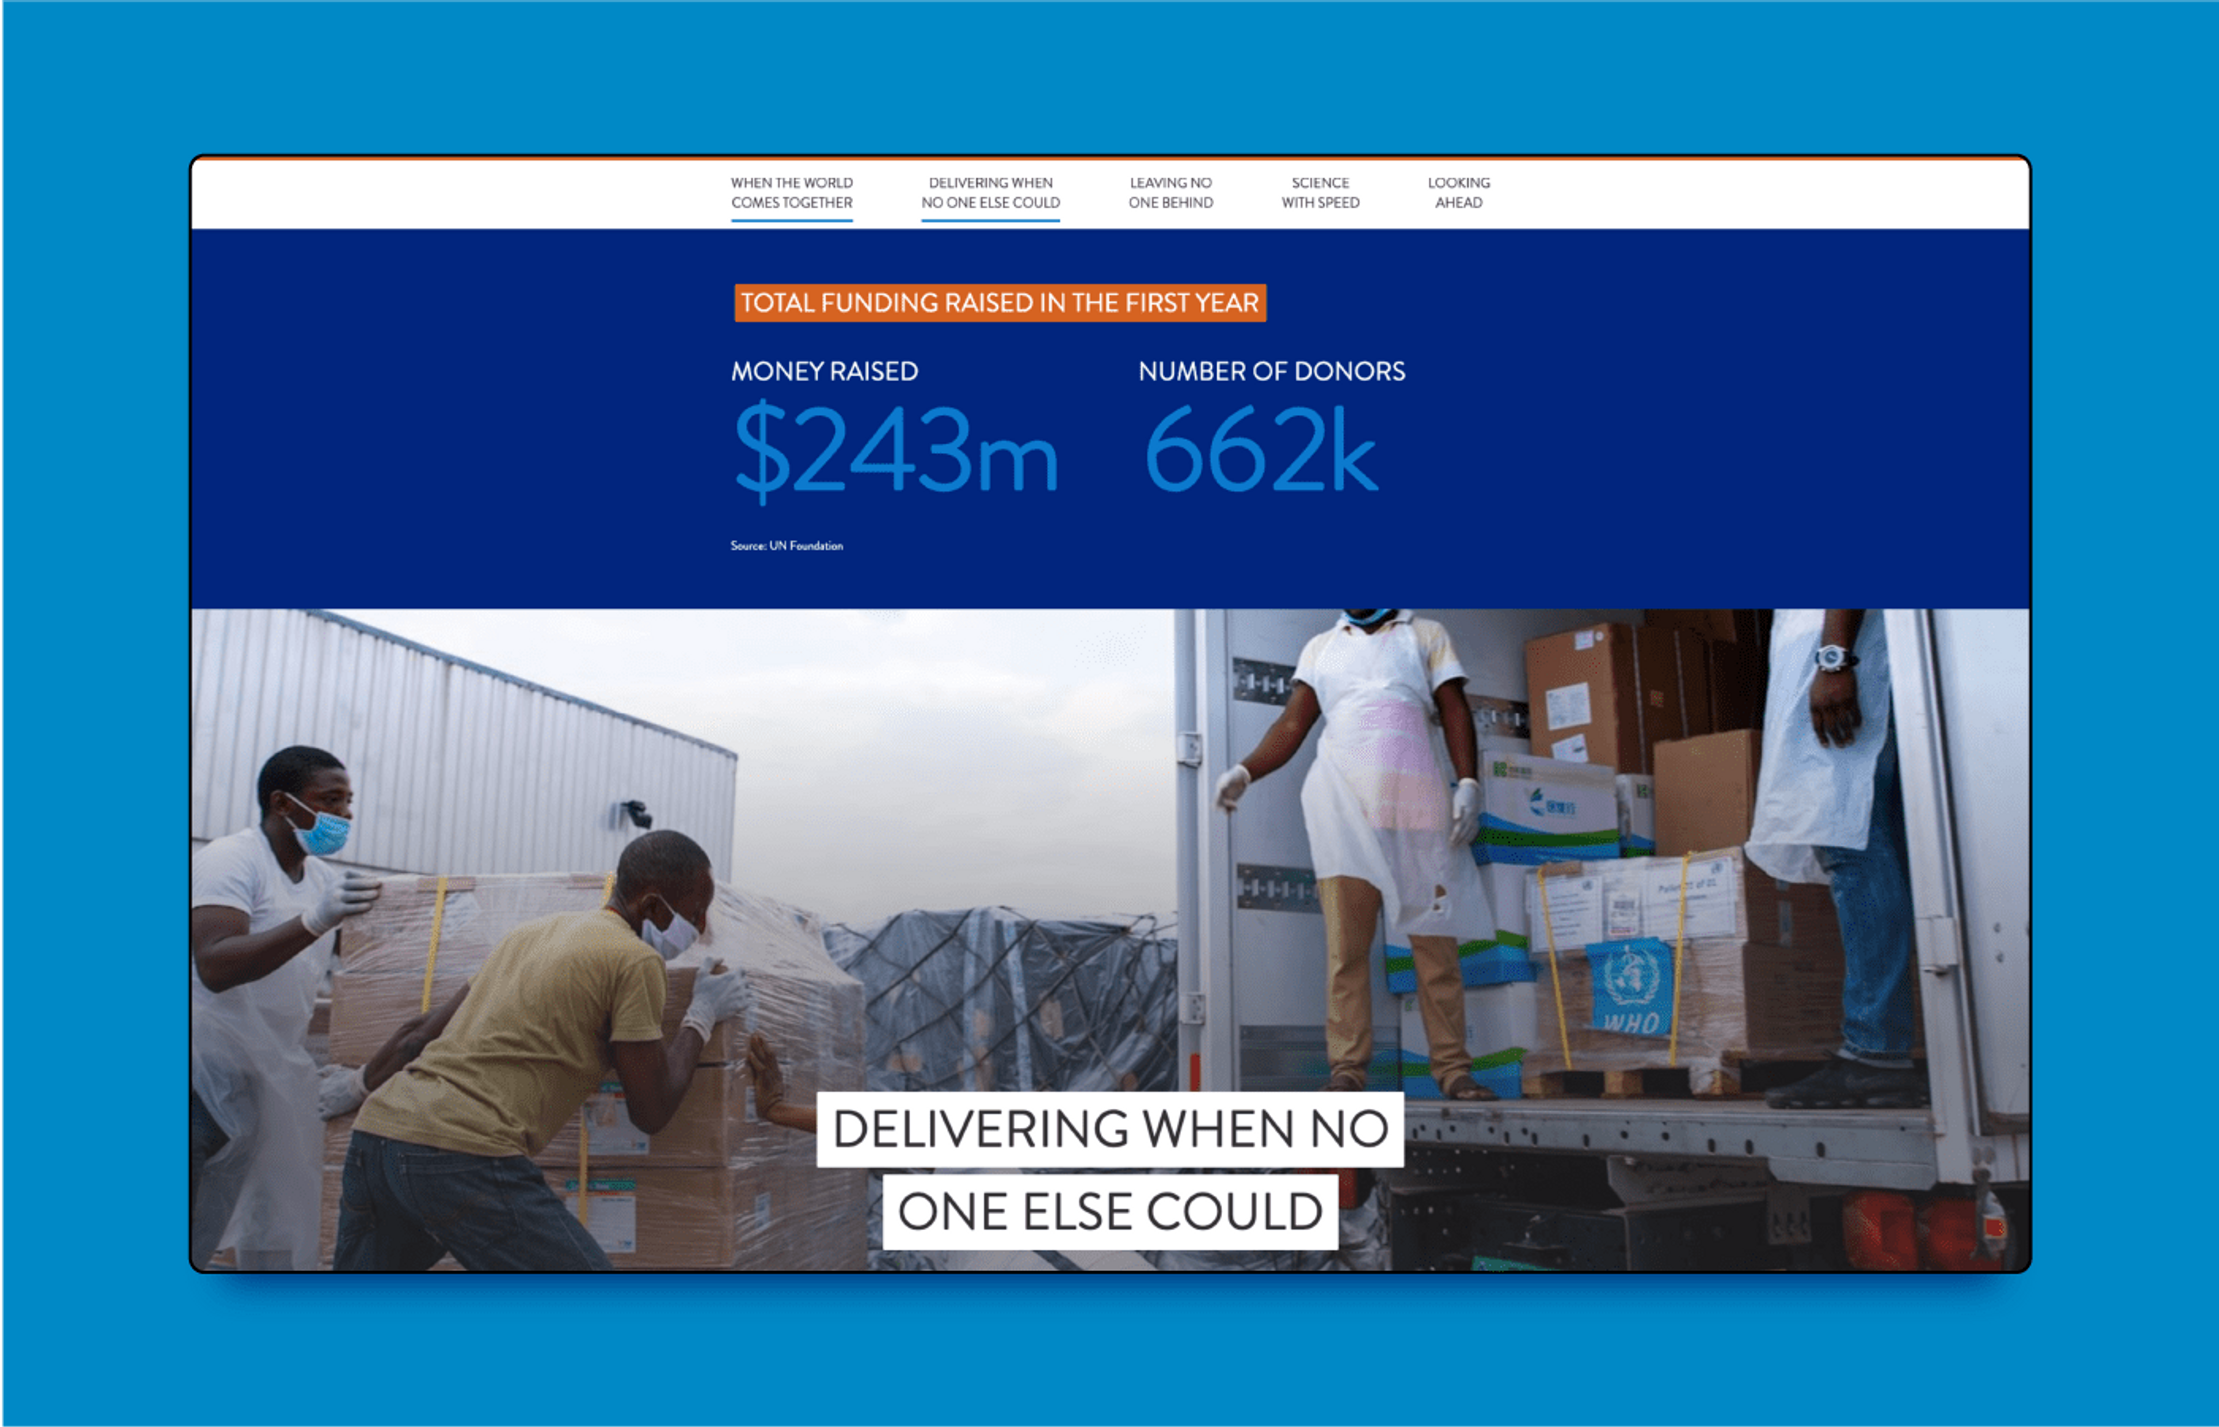 A screenshot of the 'racing against a pandemic' website. It shows a picture of people loading a medical delivery truck and some stats about money raised and number of donors.